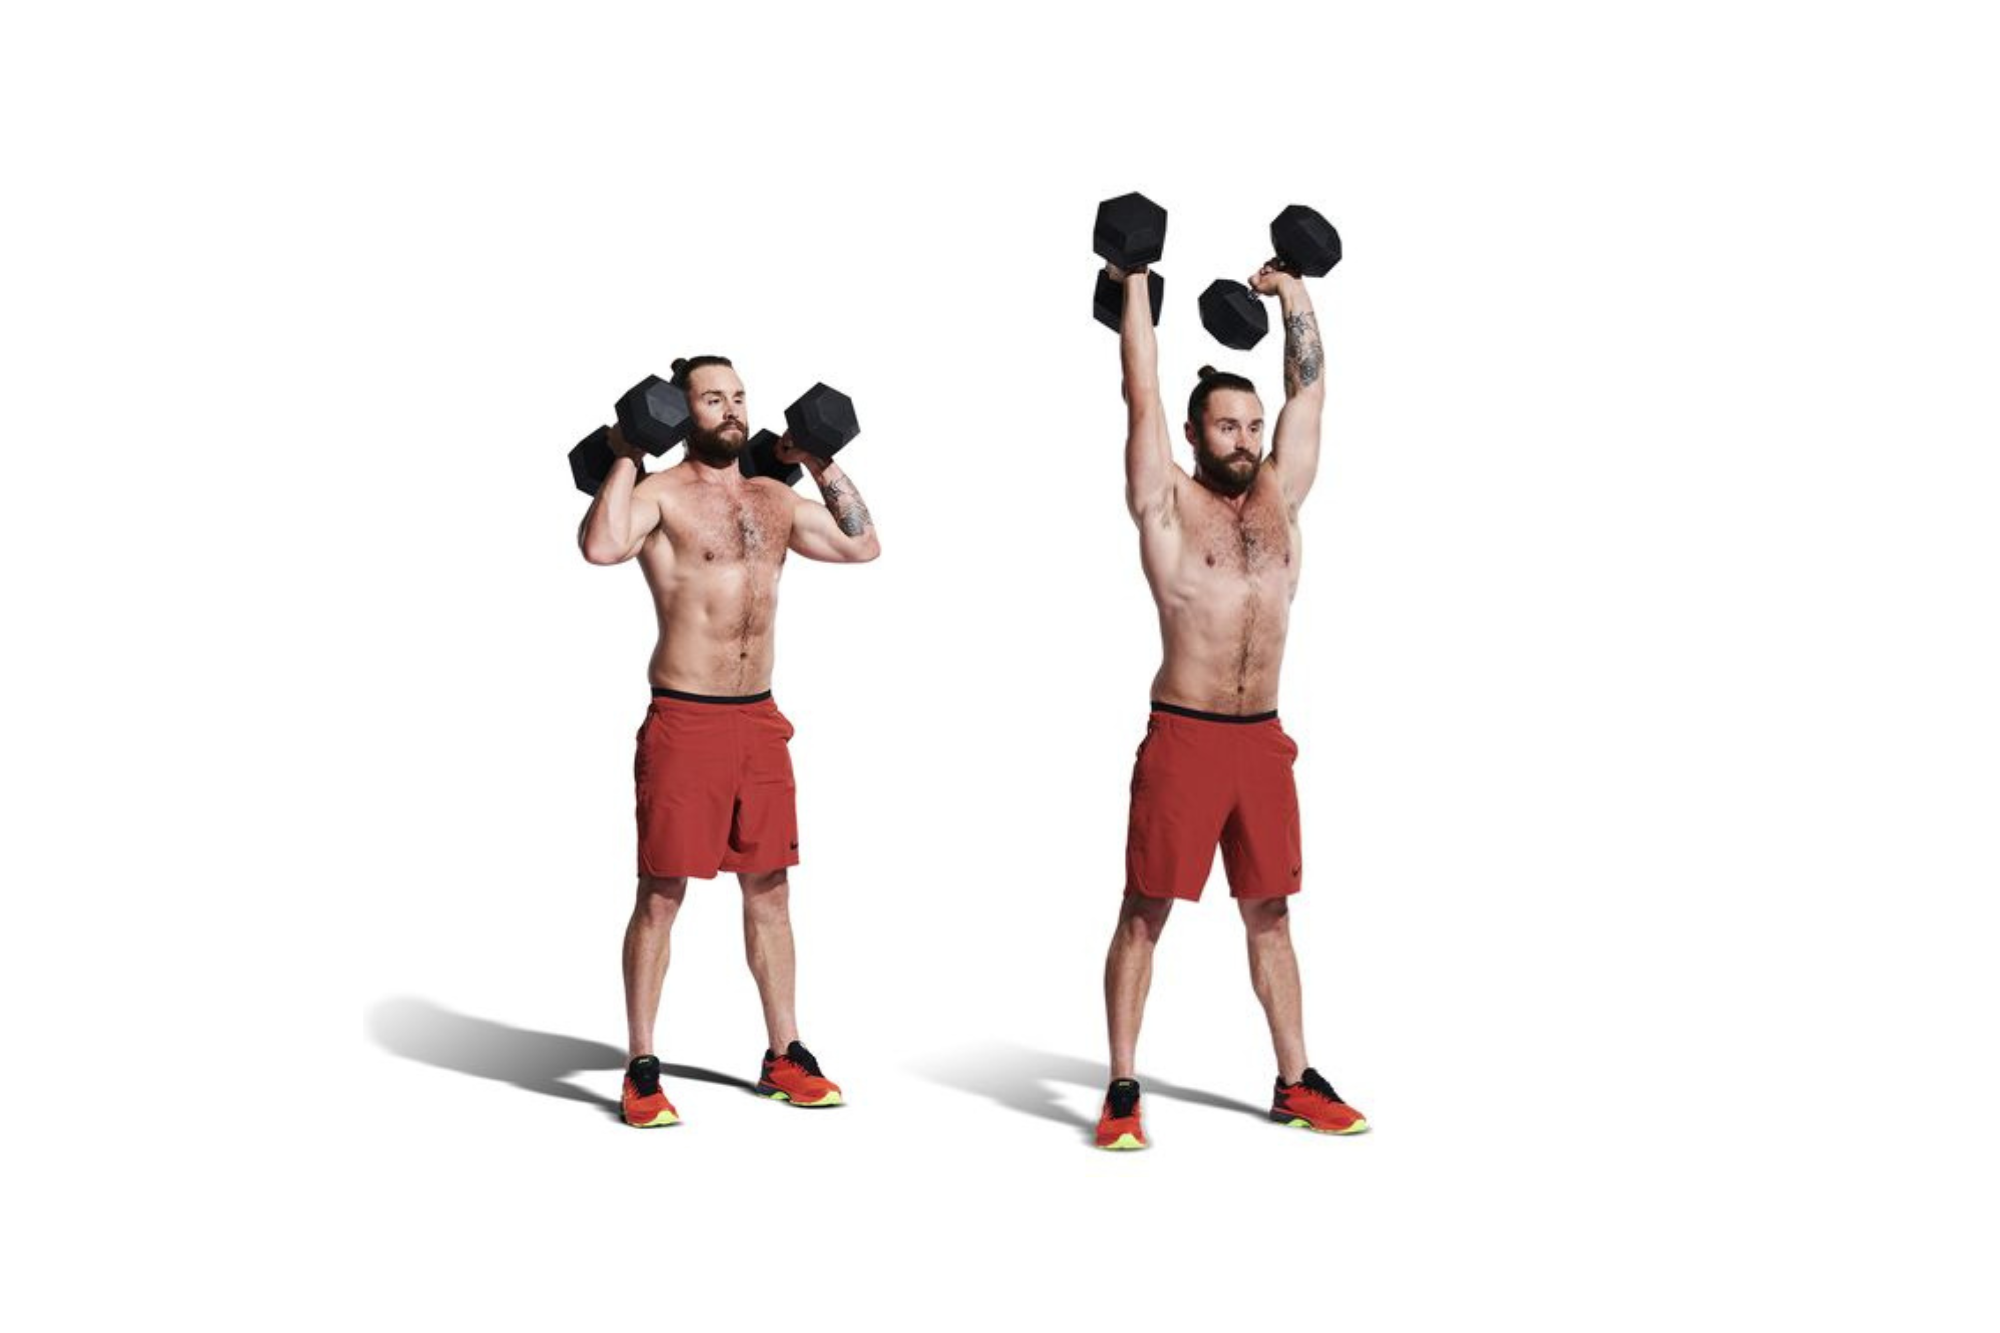 15-Minute Dumbbell Arm Workout for Bigger Biceps and Triceps